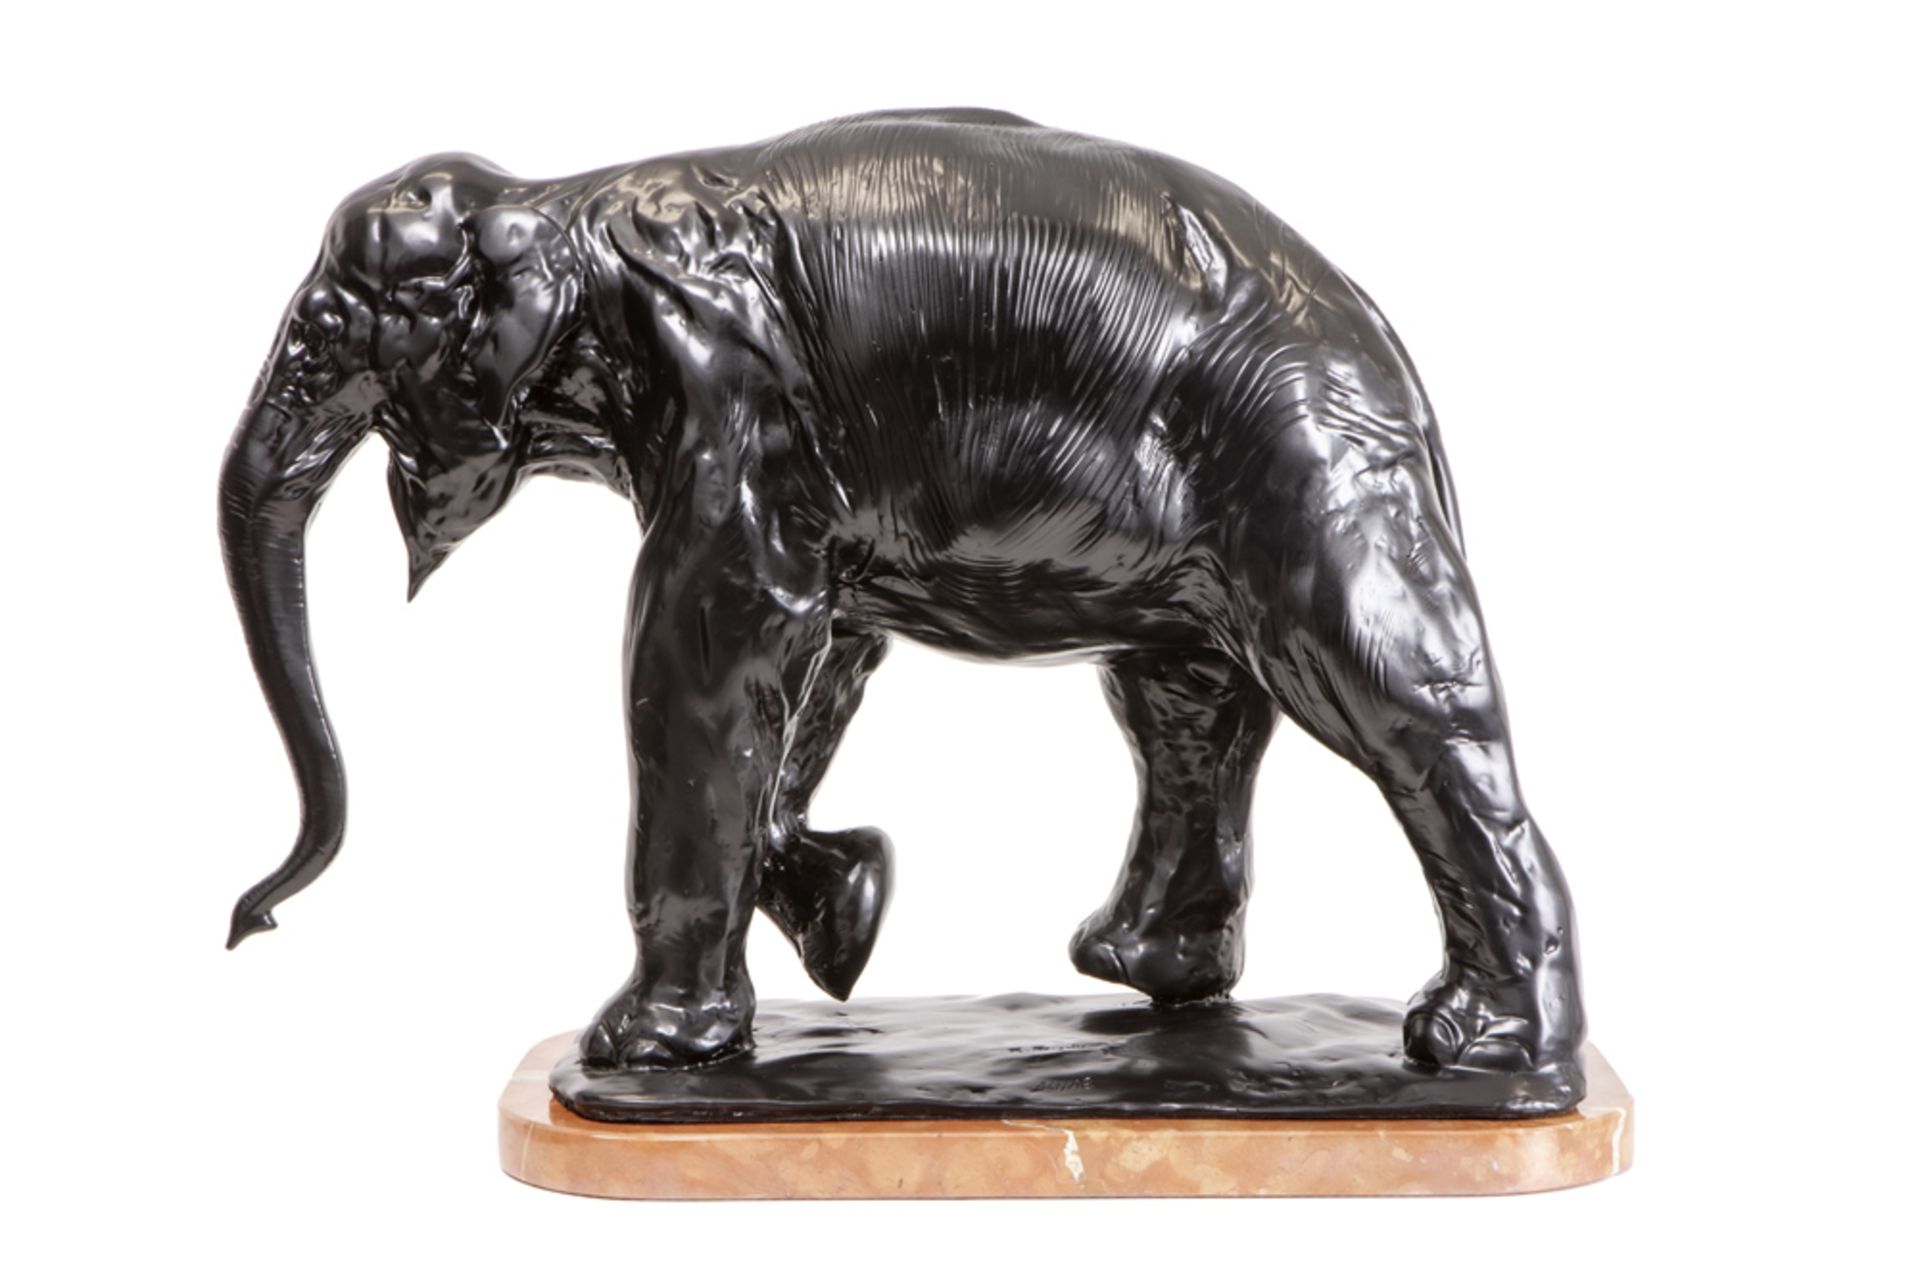 Rembrandt Bugatti "Walking Elephant" sculpture in bronze - signed posthumous cast by Ebano - with - Image 2 of 4